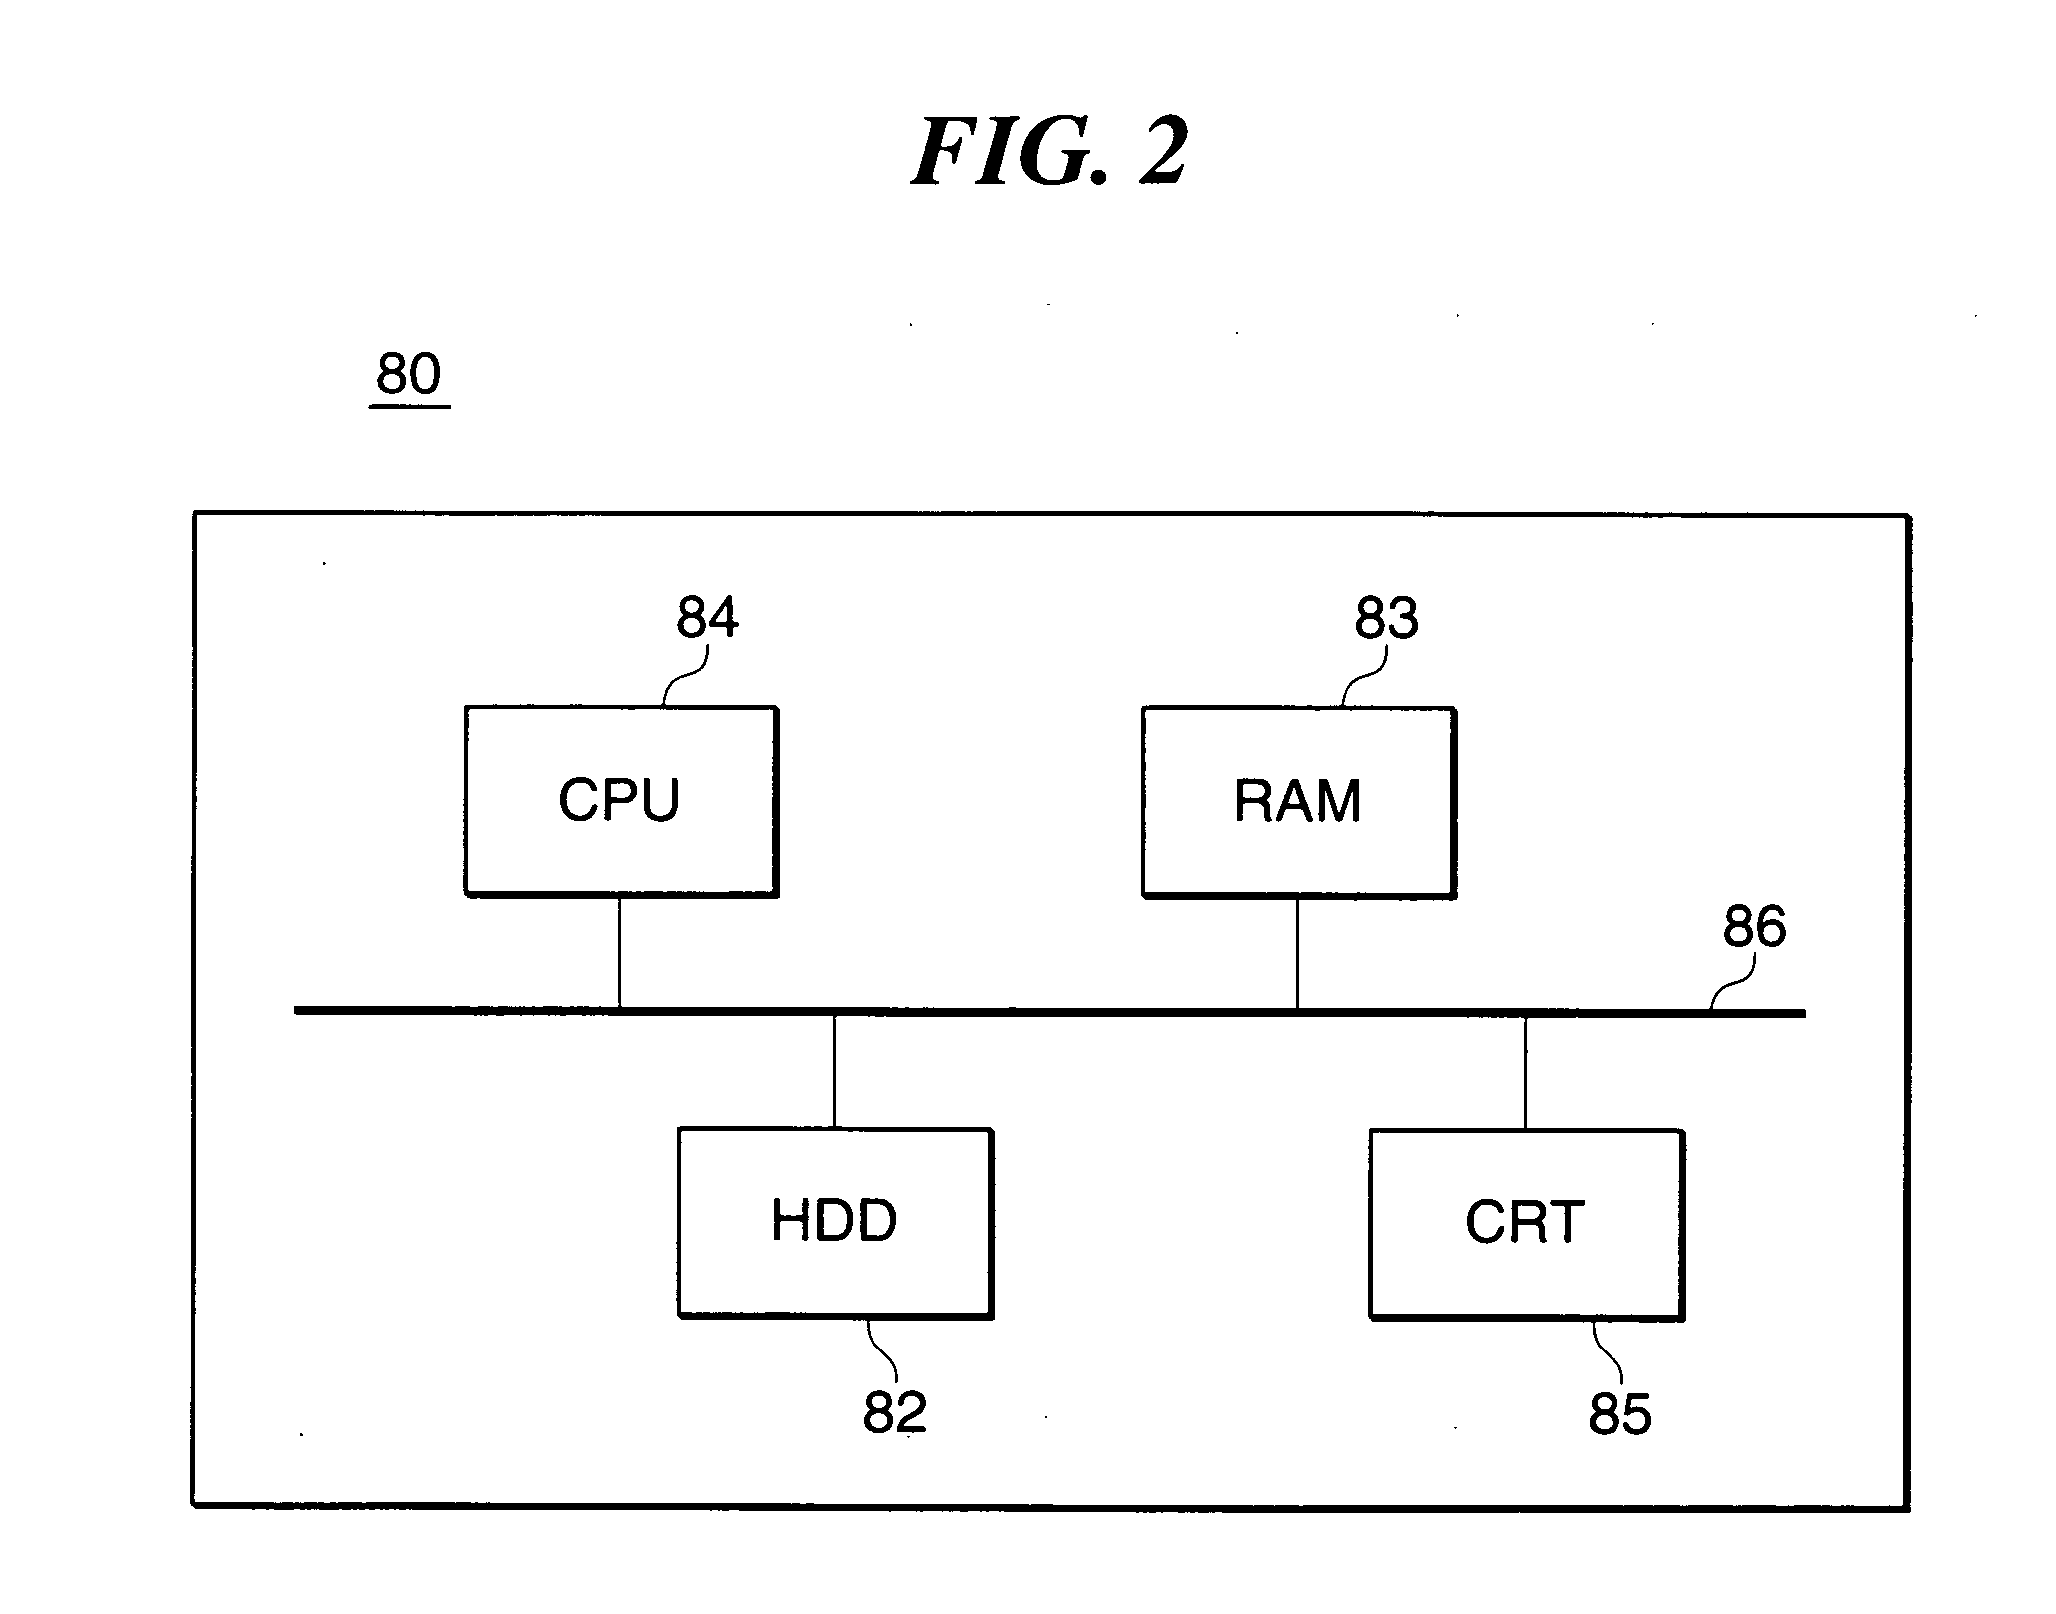 Substrate processing apparatus, control method for the apparatus, and program for implementing the method